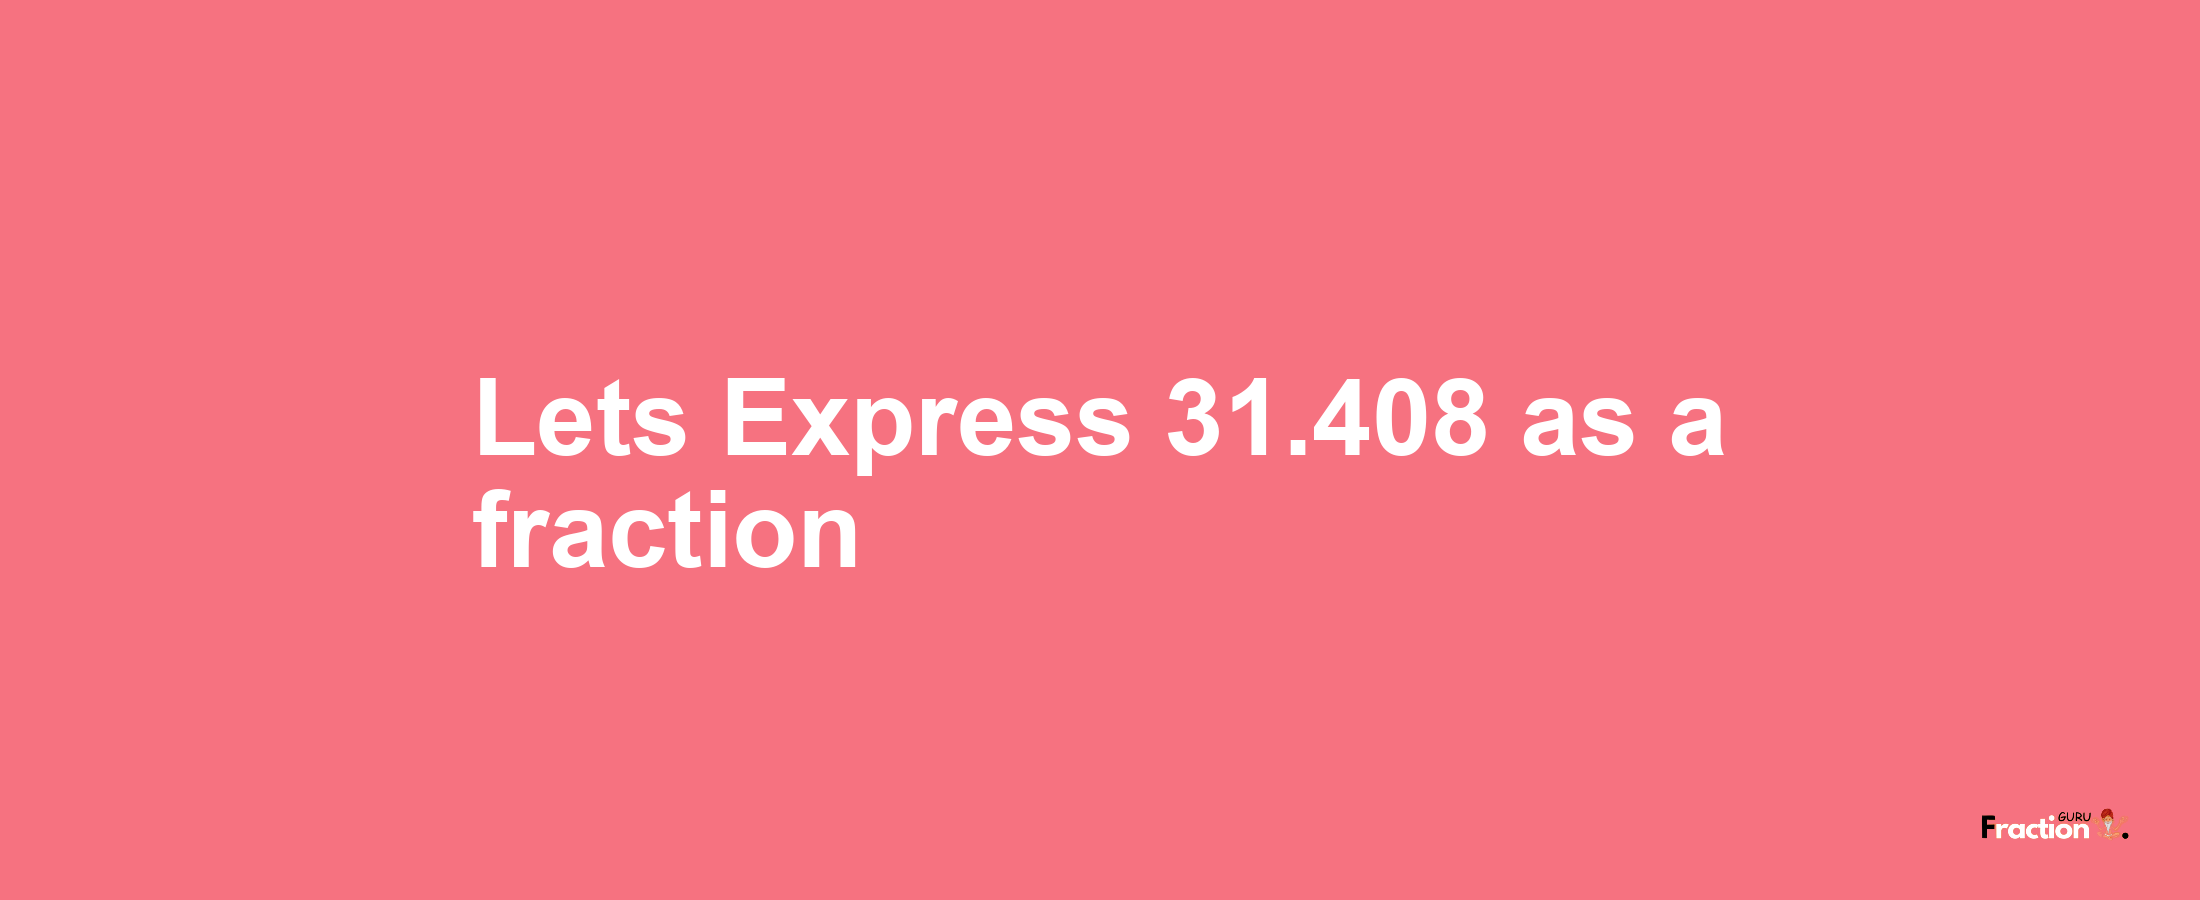 Lets Express 31.408 as afraction